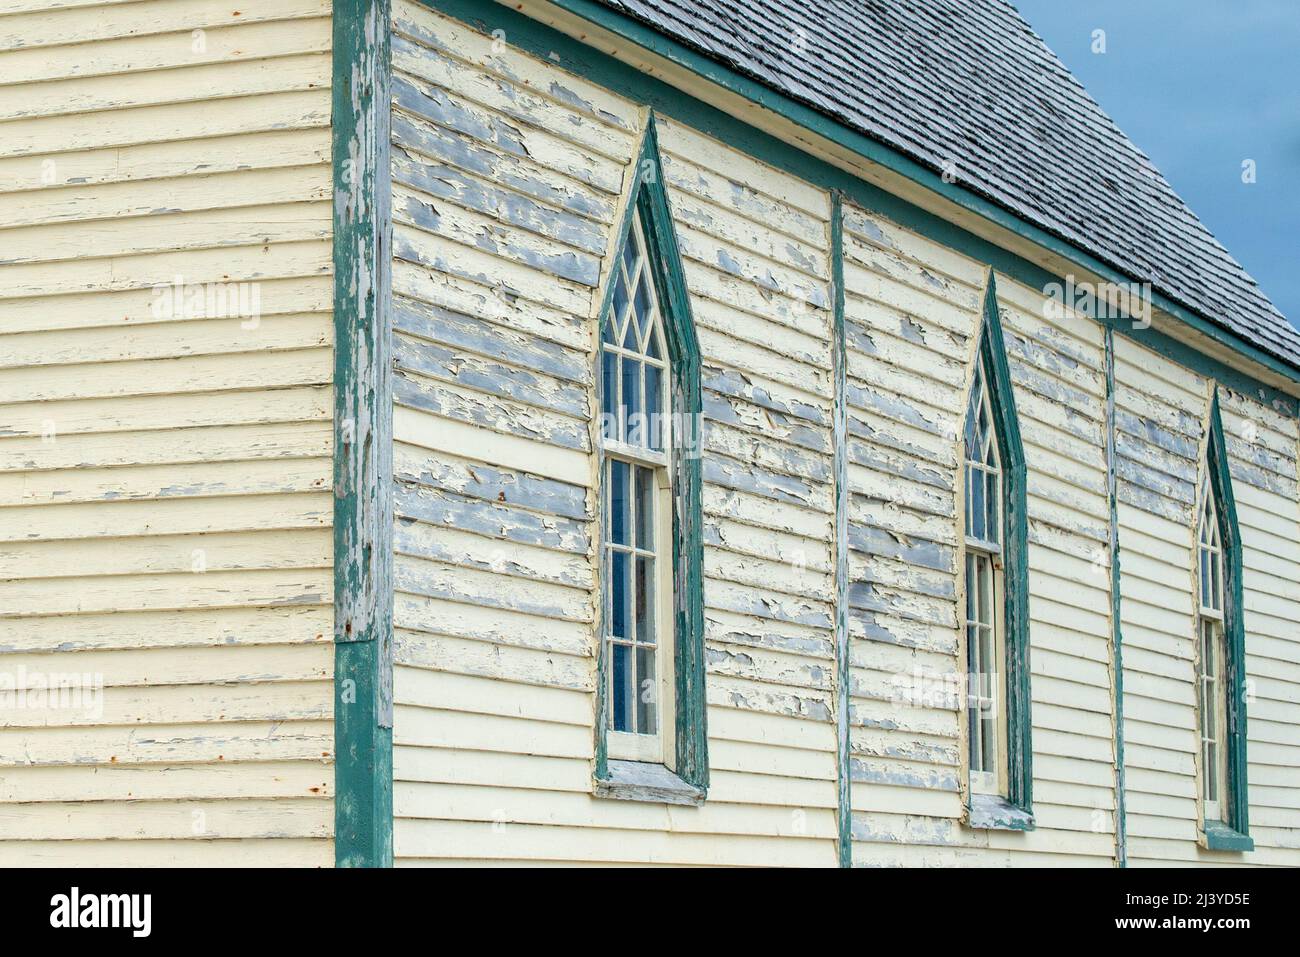 The exterior wall of a religious building with pale yellow colored narrow horizontal clapboard siding and tall Gothic-style windows with clear glass, Stock Photo